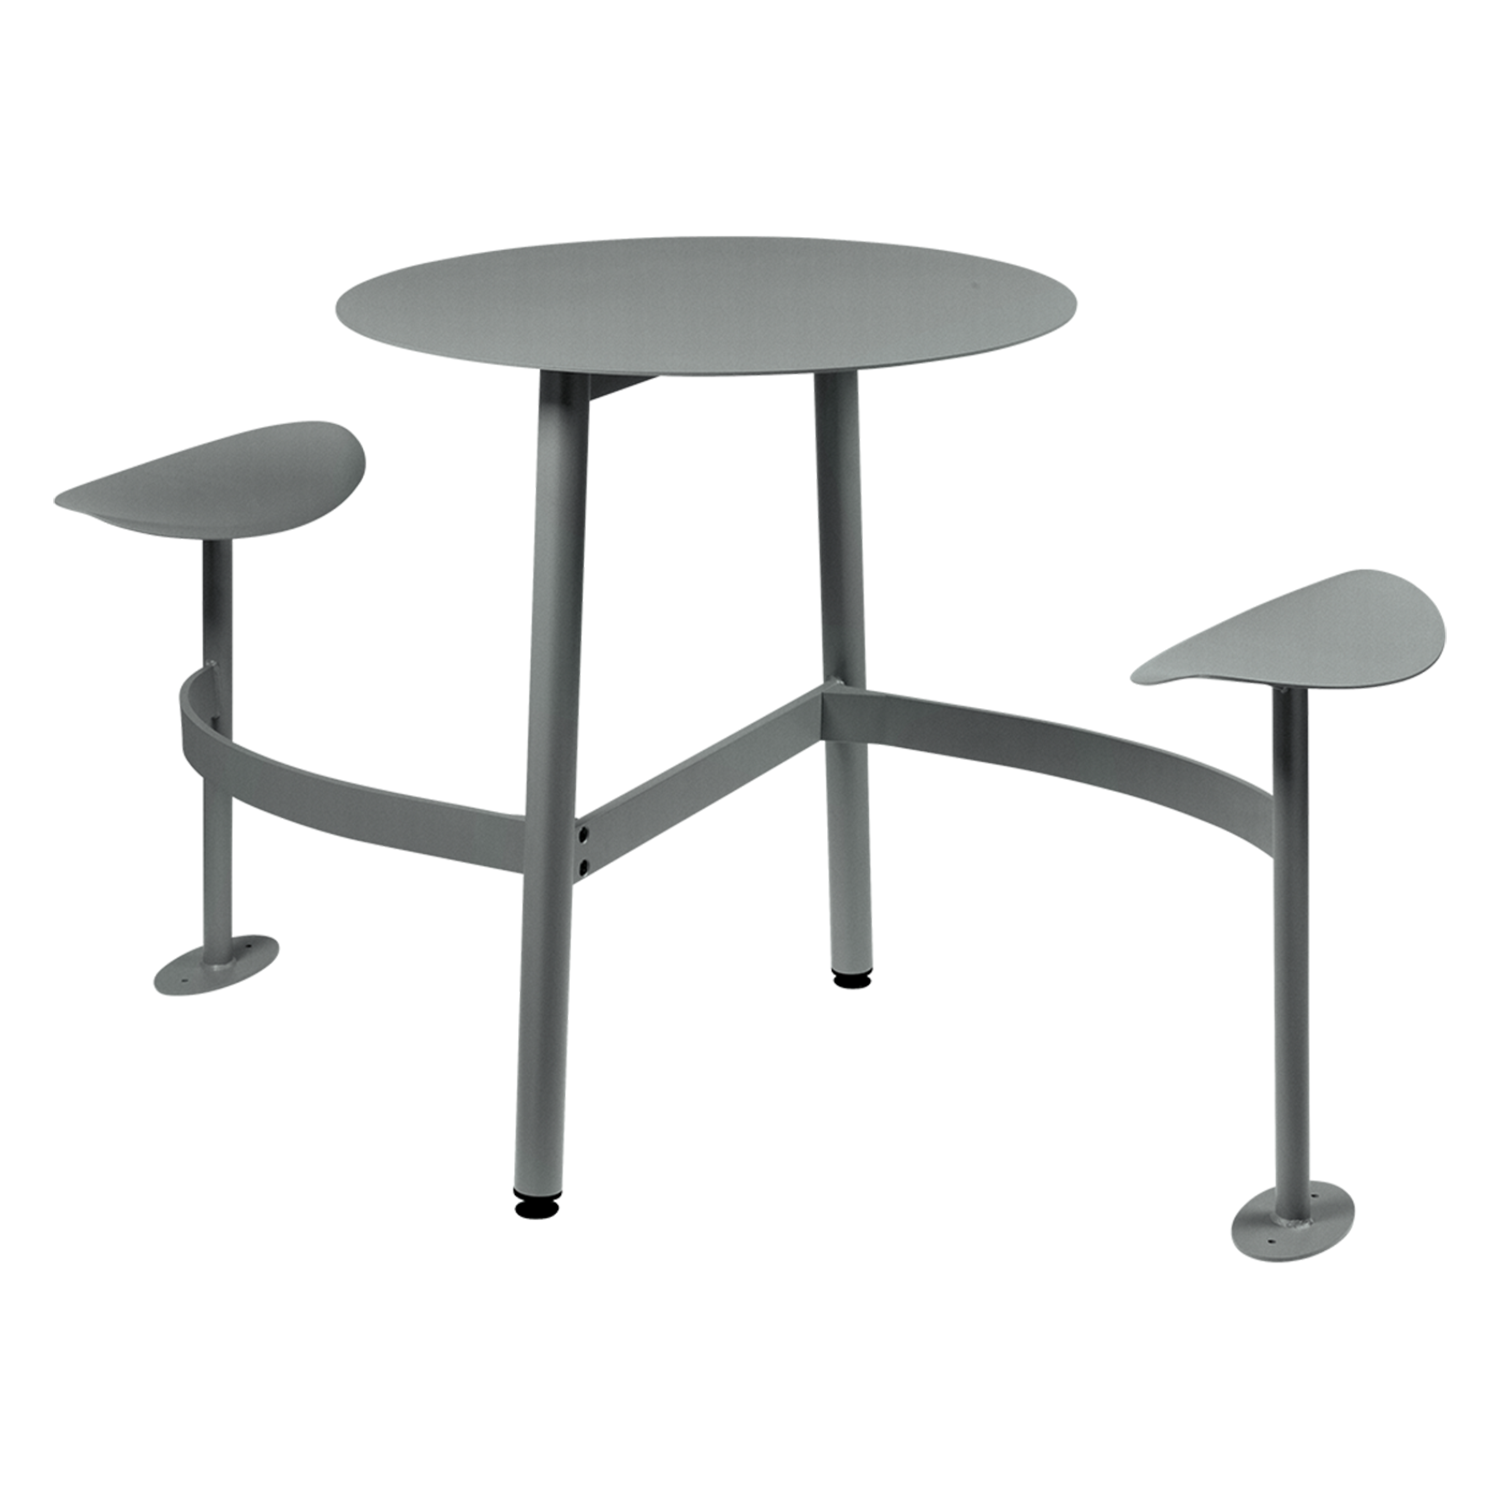 Bolder 2-Seater Round Table with Seats